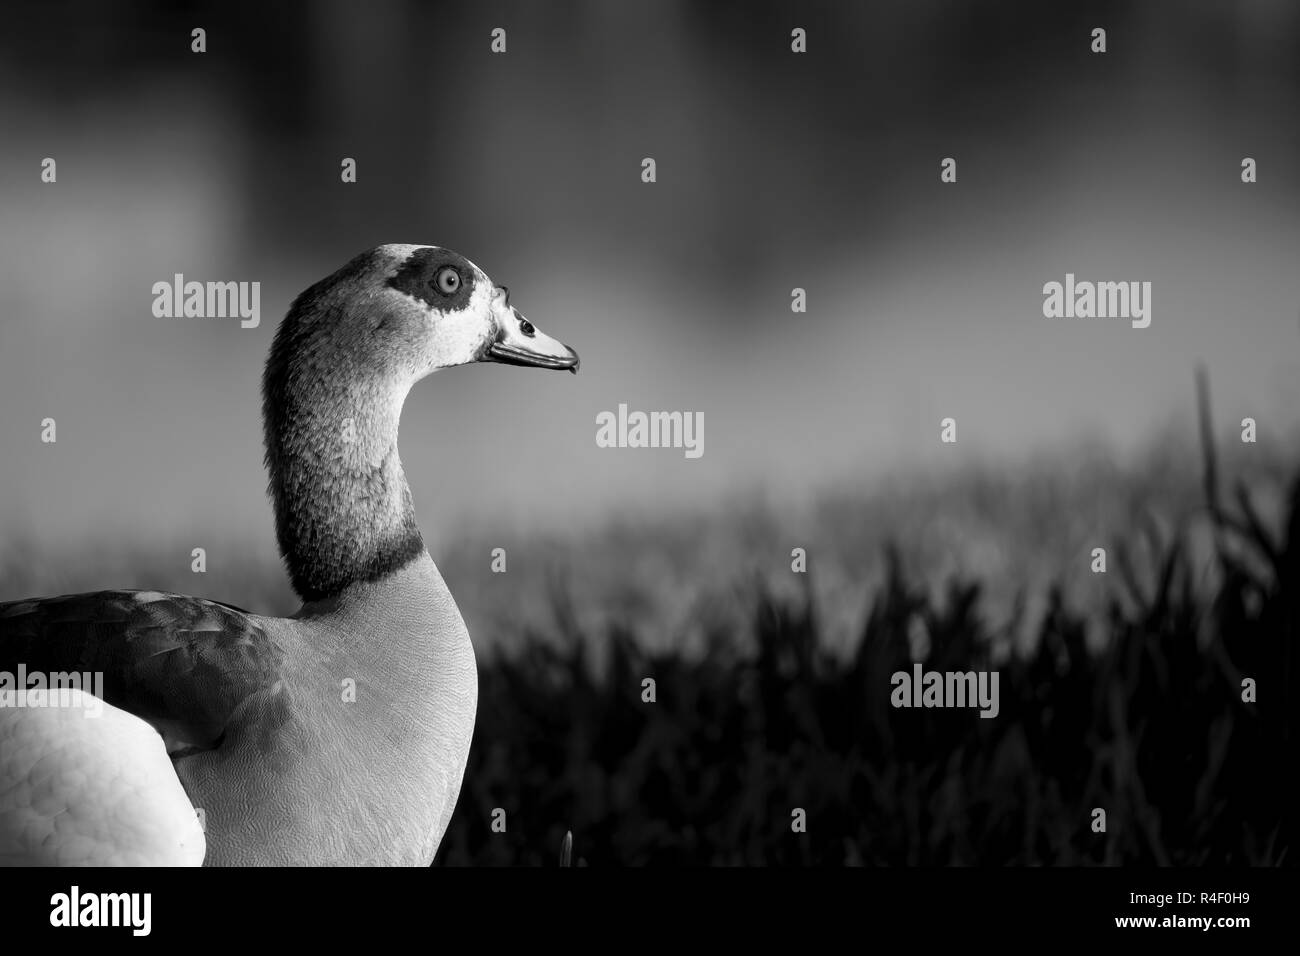 Swan duckling Black and White Stock Photos & Images - Alamy